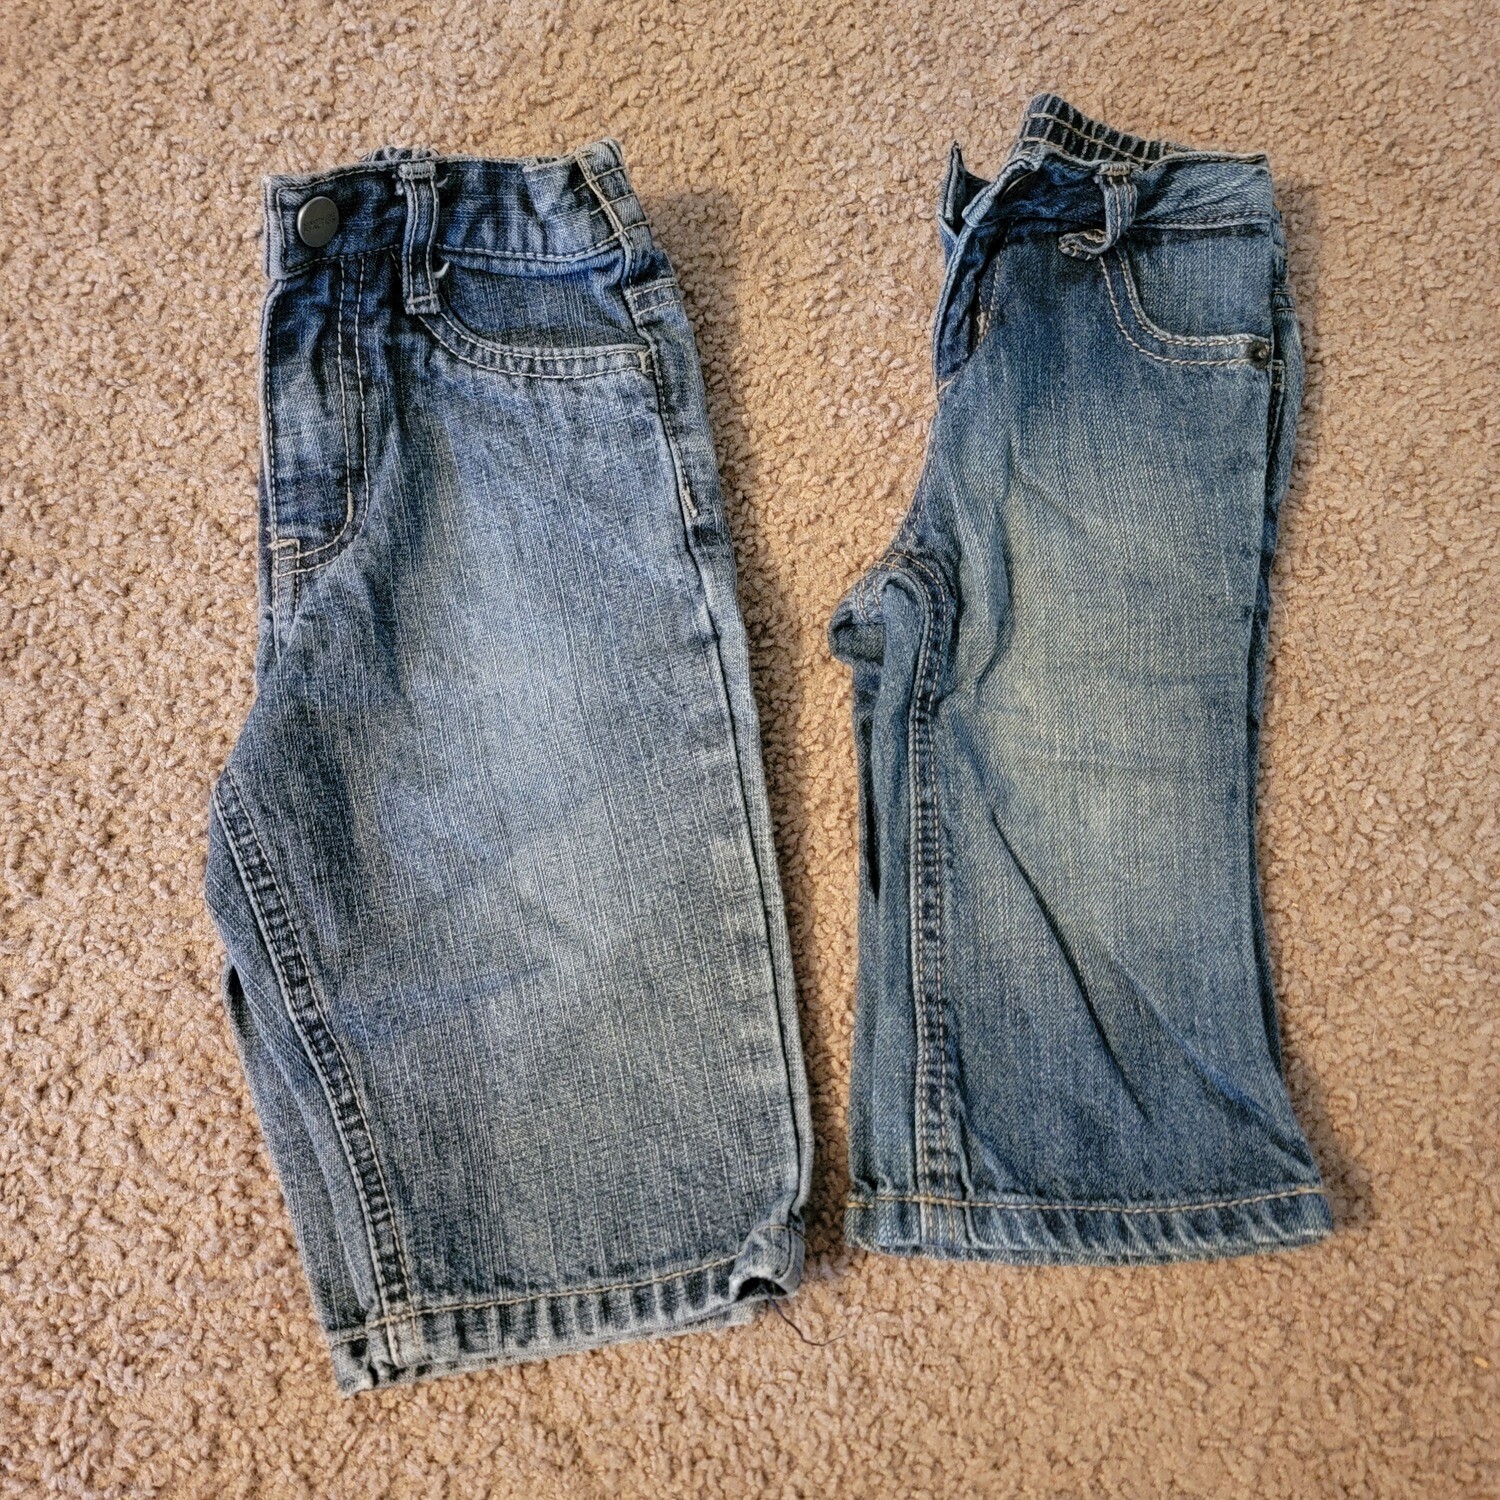 2 pairs of jeans